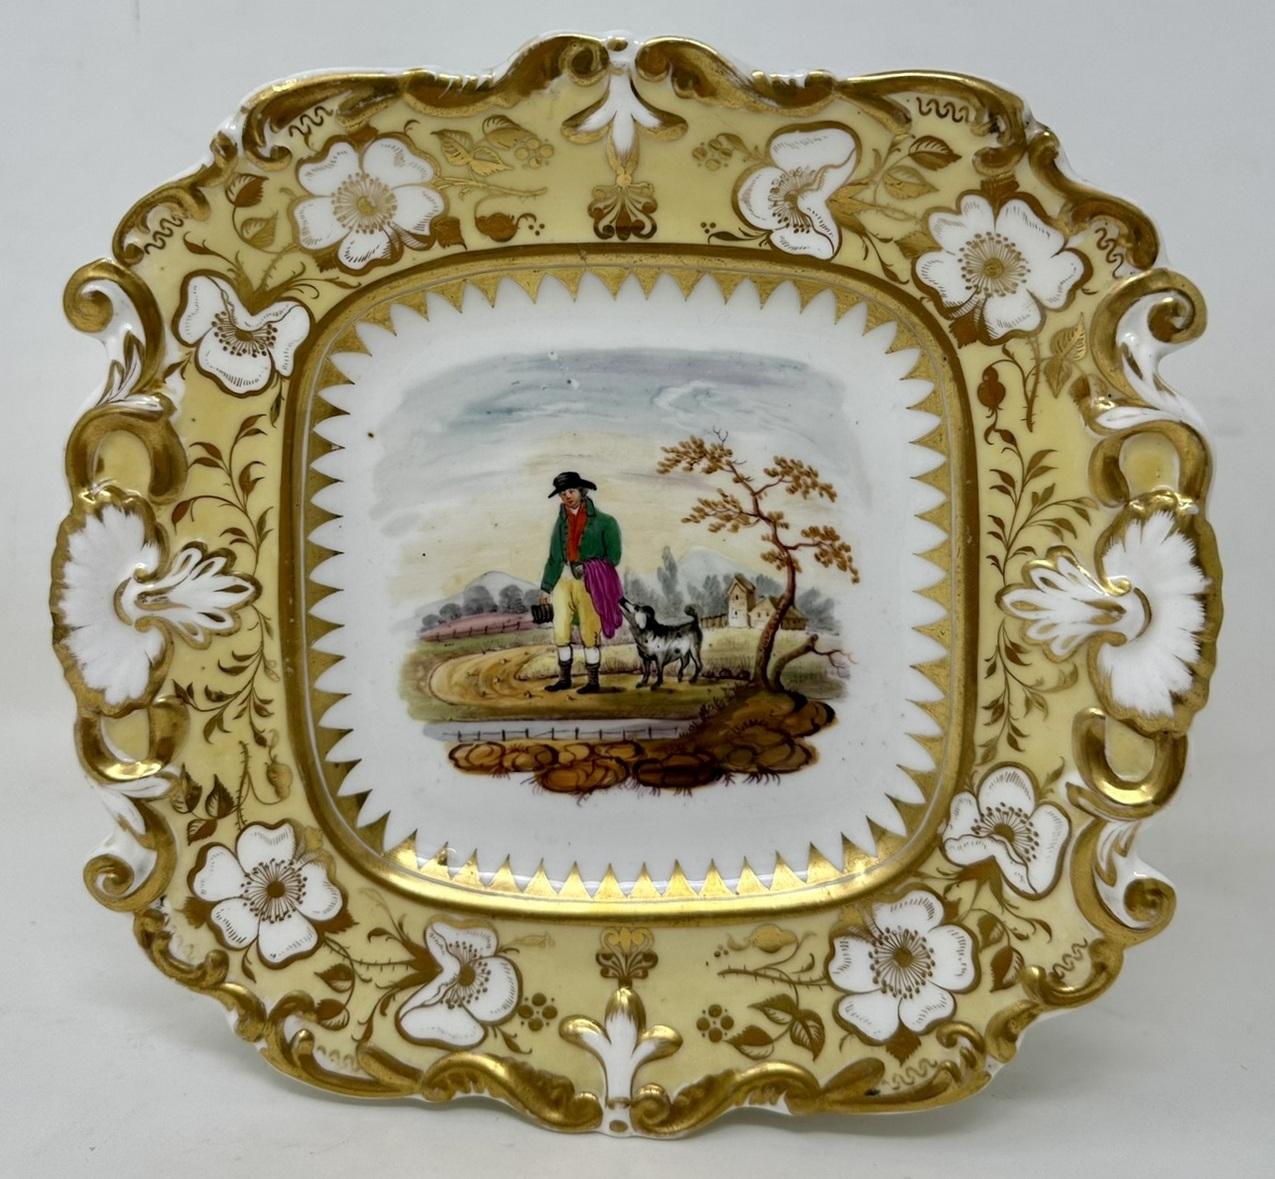 Wonderful Identical Pair of Early English Porcelain China Cabinet or Wall Plates of square outline with lavish raised gilt surrounds in the Rococo taste, possibly made by Royal Crown Derby or Rockingham. Mid to late Nineteenth Century. 

Depicting